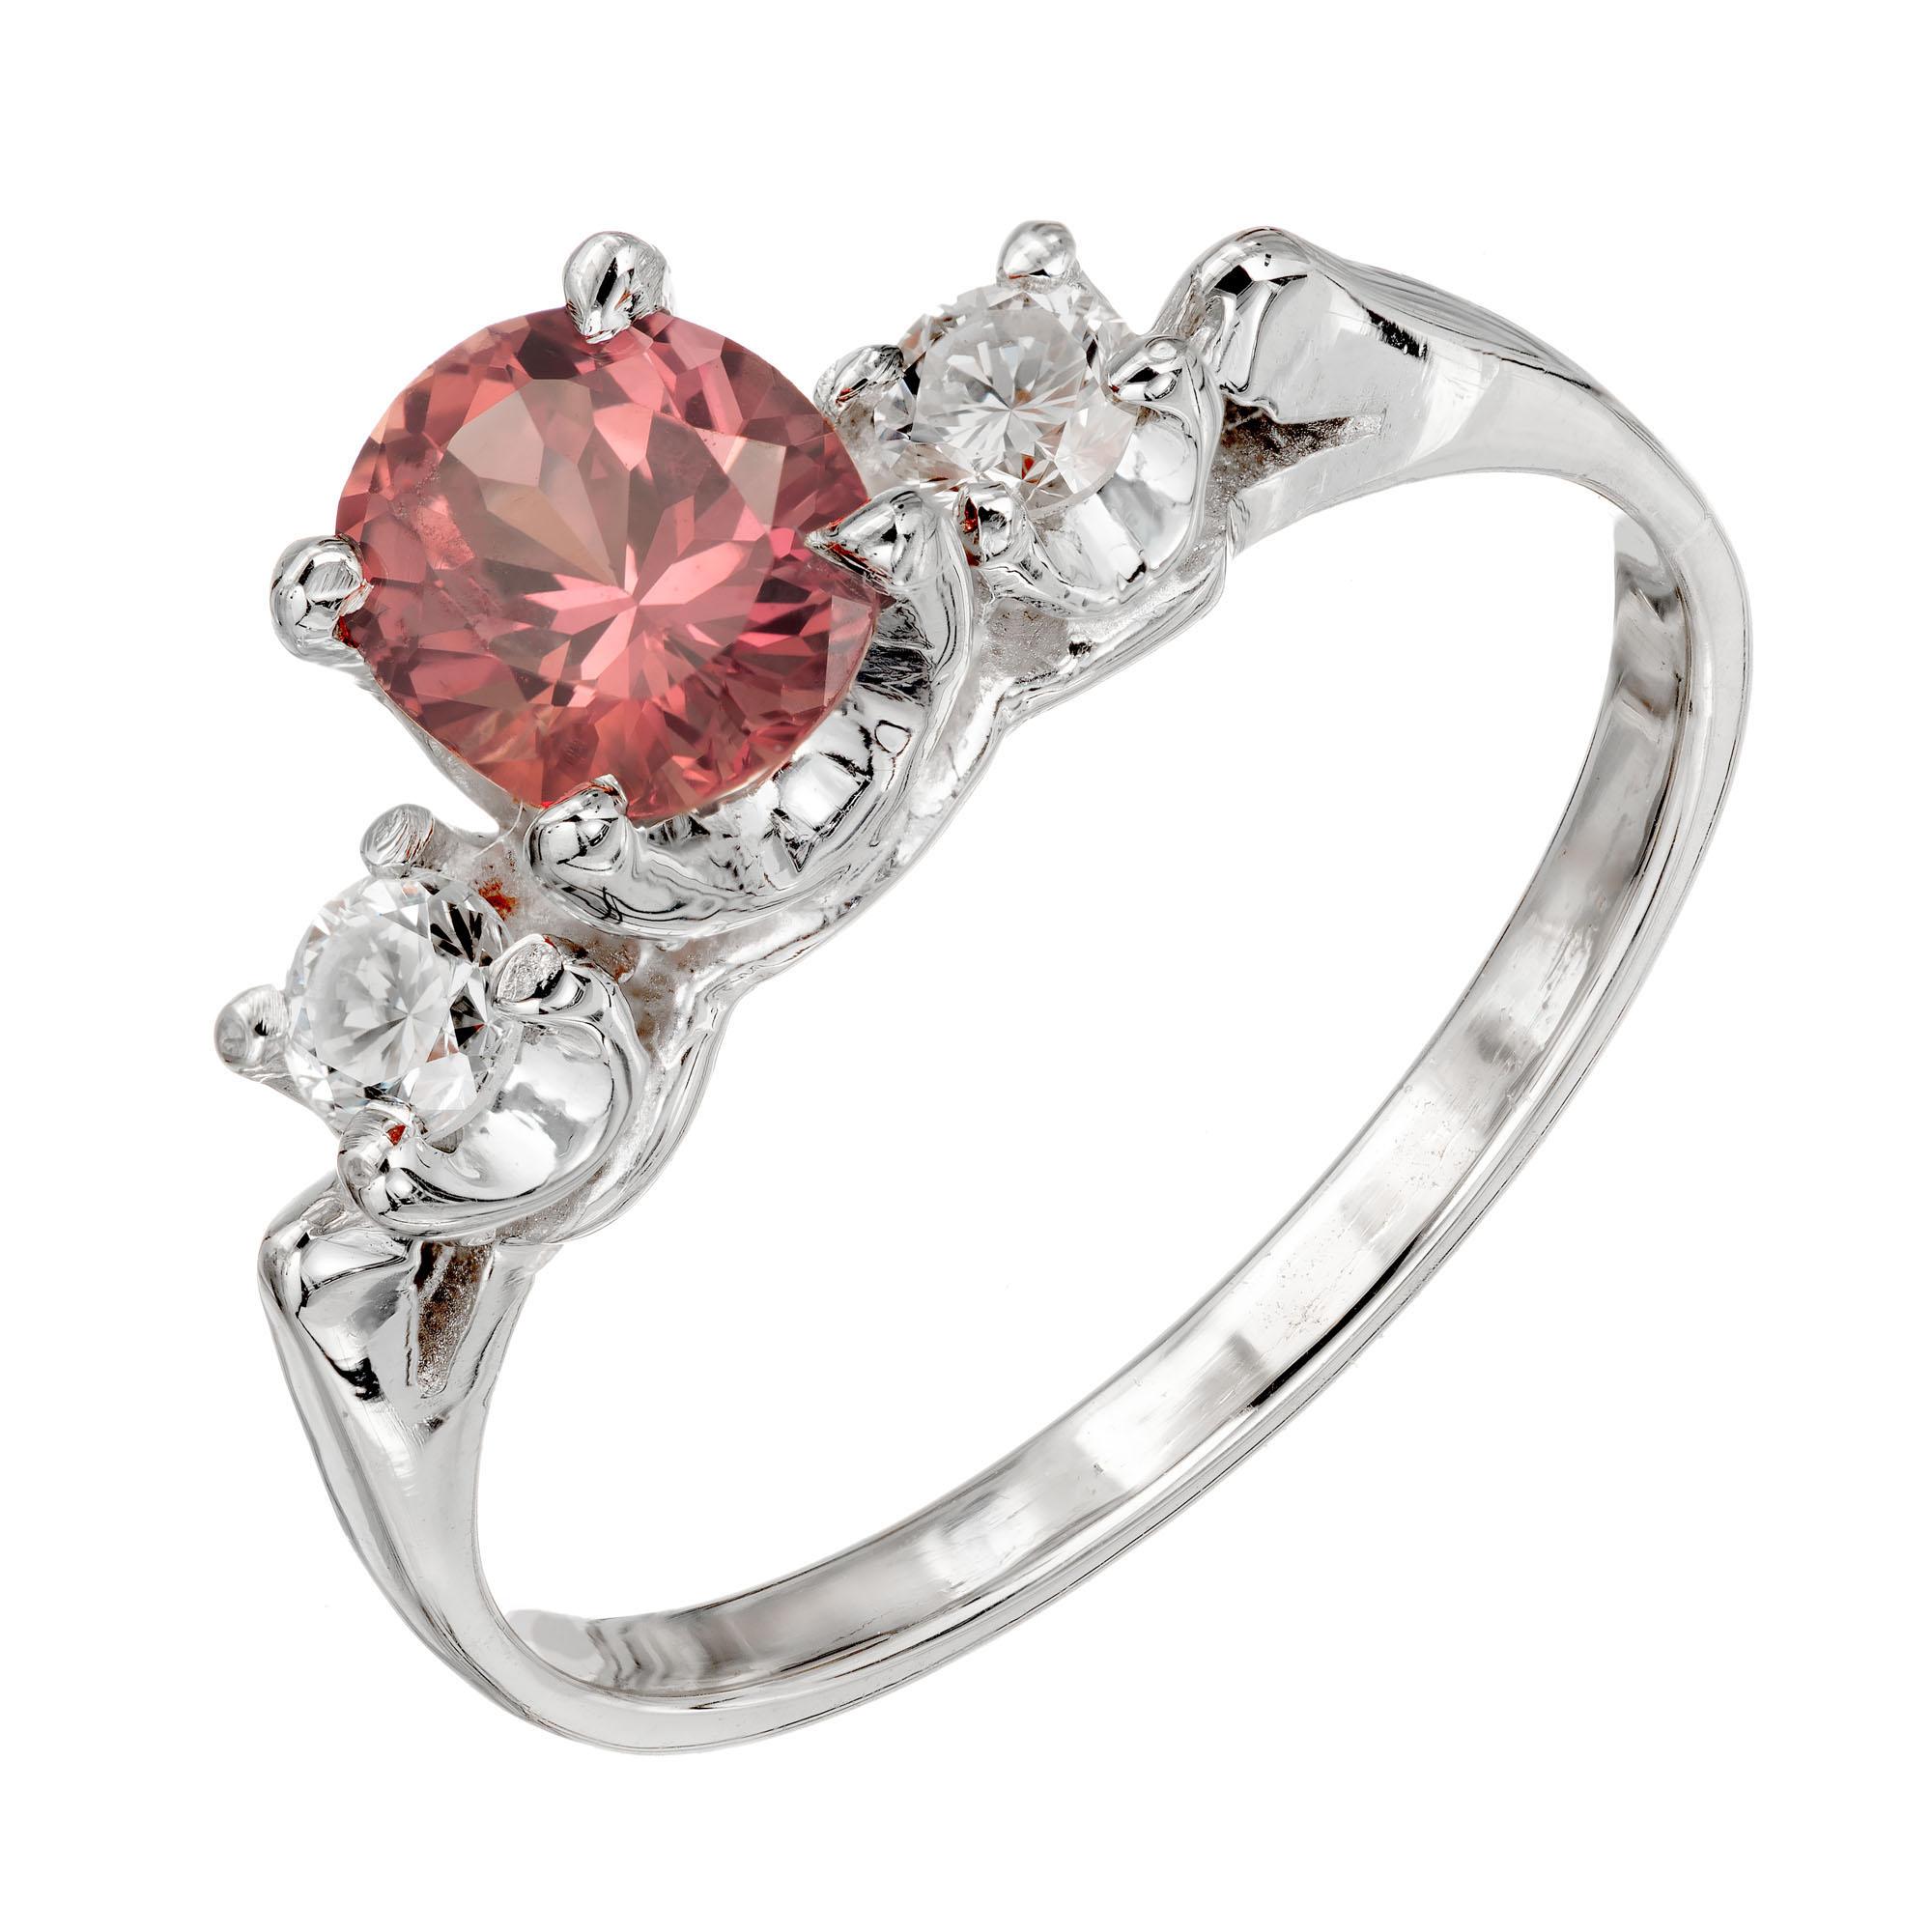 Pink brown sapphire and white diamond three-stone engagement ring. Natural no heat oval natural Padparadscha center sapphire that changes from brown to pink in different lighting, accented with 2 side round side diamonds in a three-stone gold